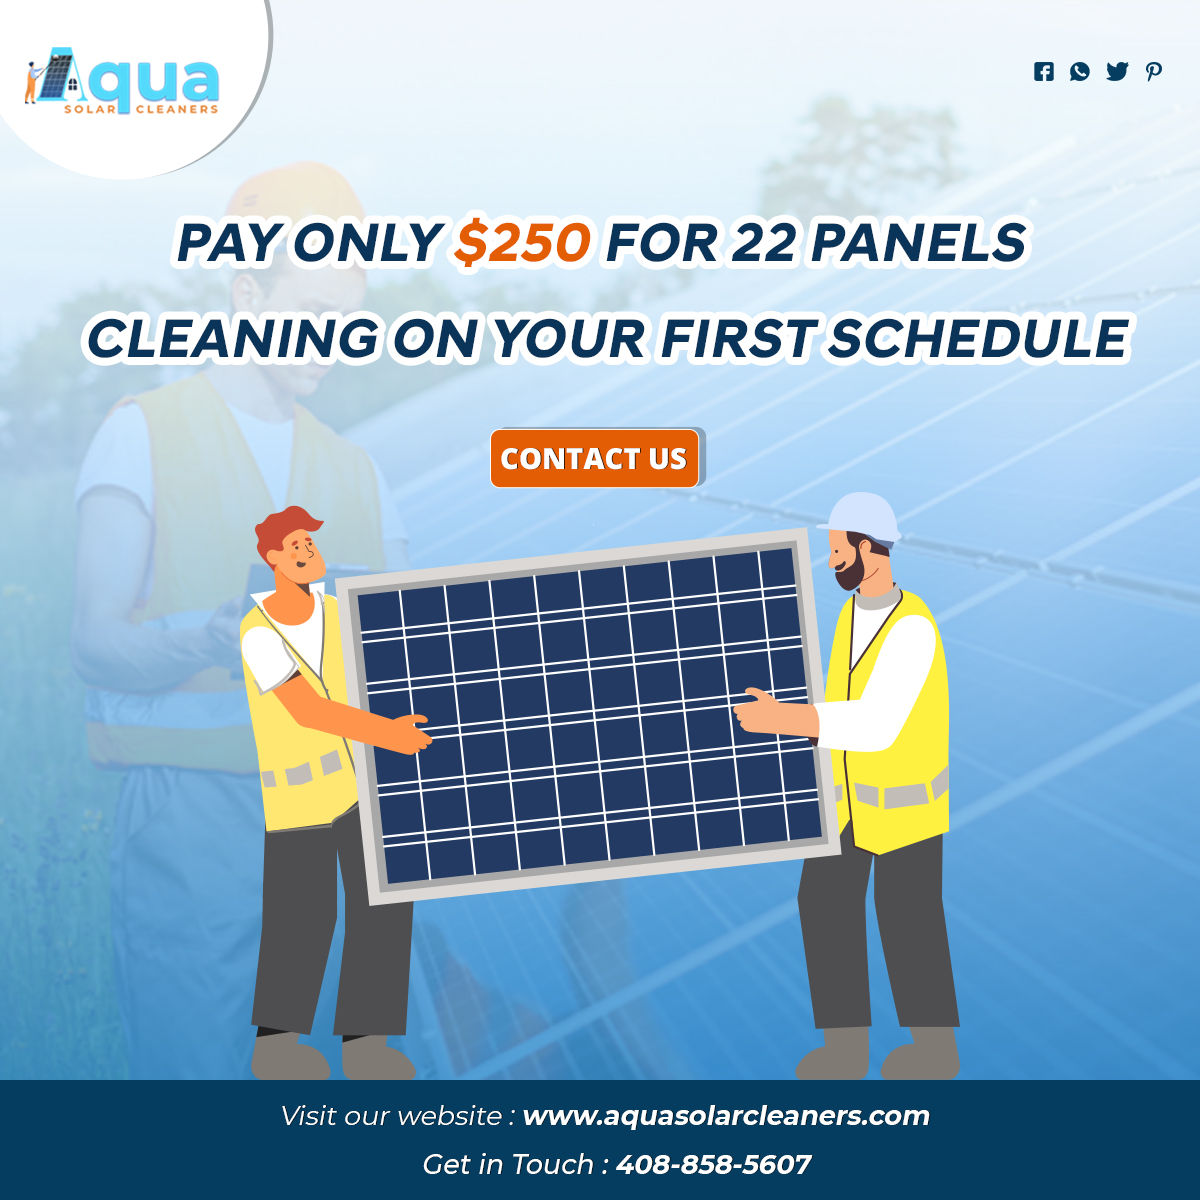 Pay only $250 for 22 panels cleaning on your first schedule. Contact us or Book Online today!